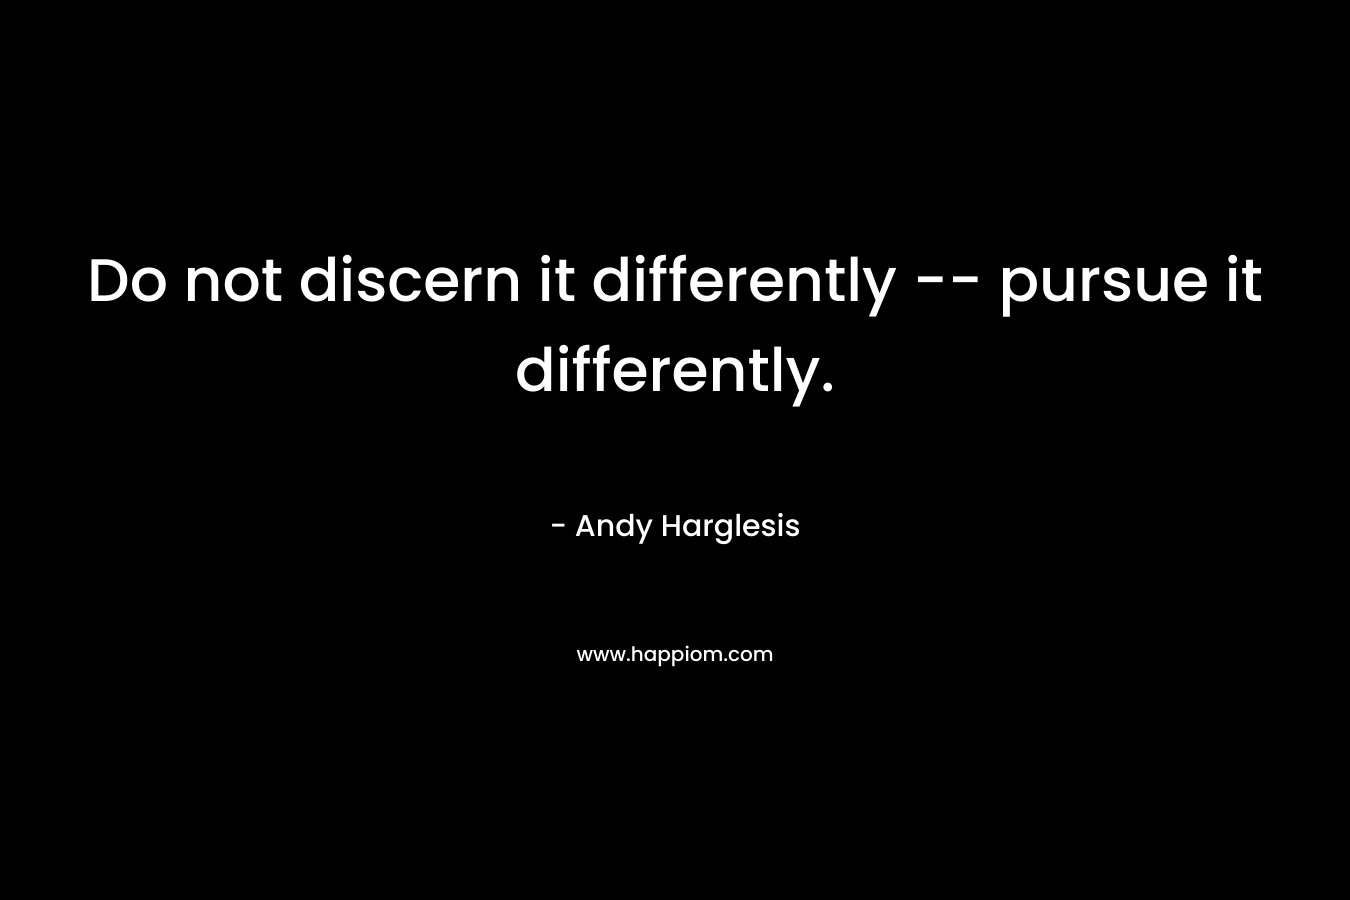 Do not discern it differently -- pursue it differently.